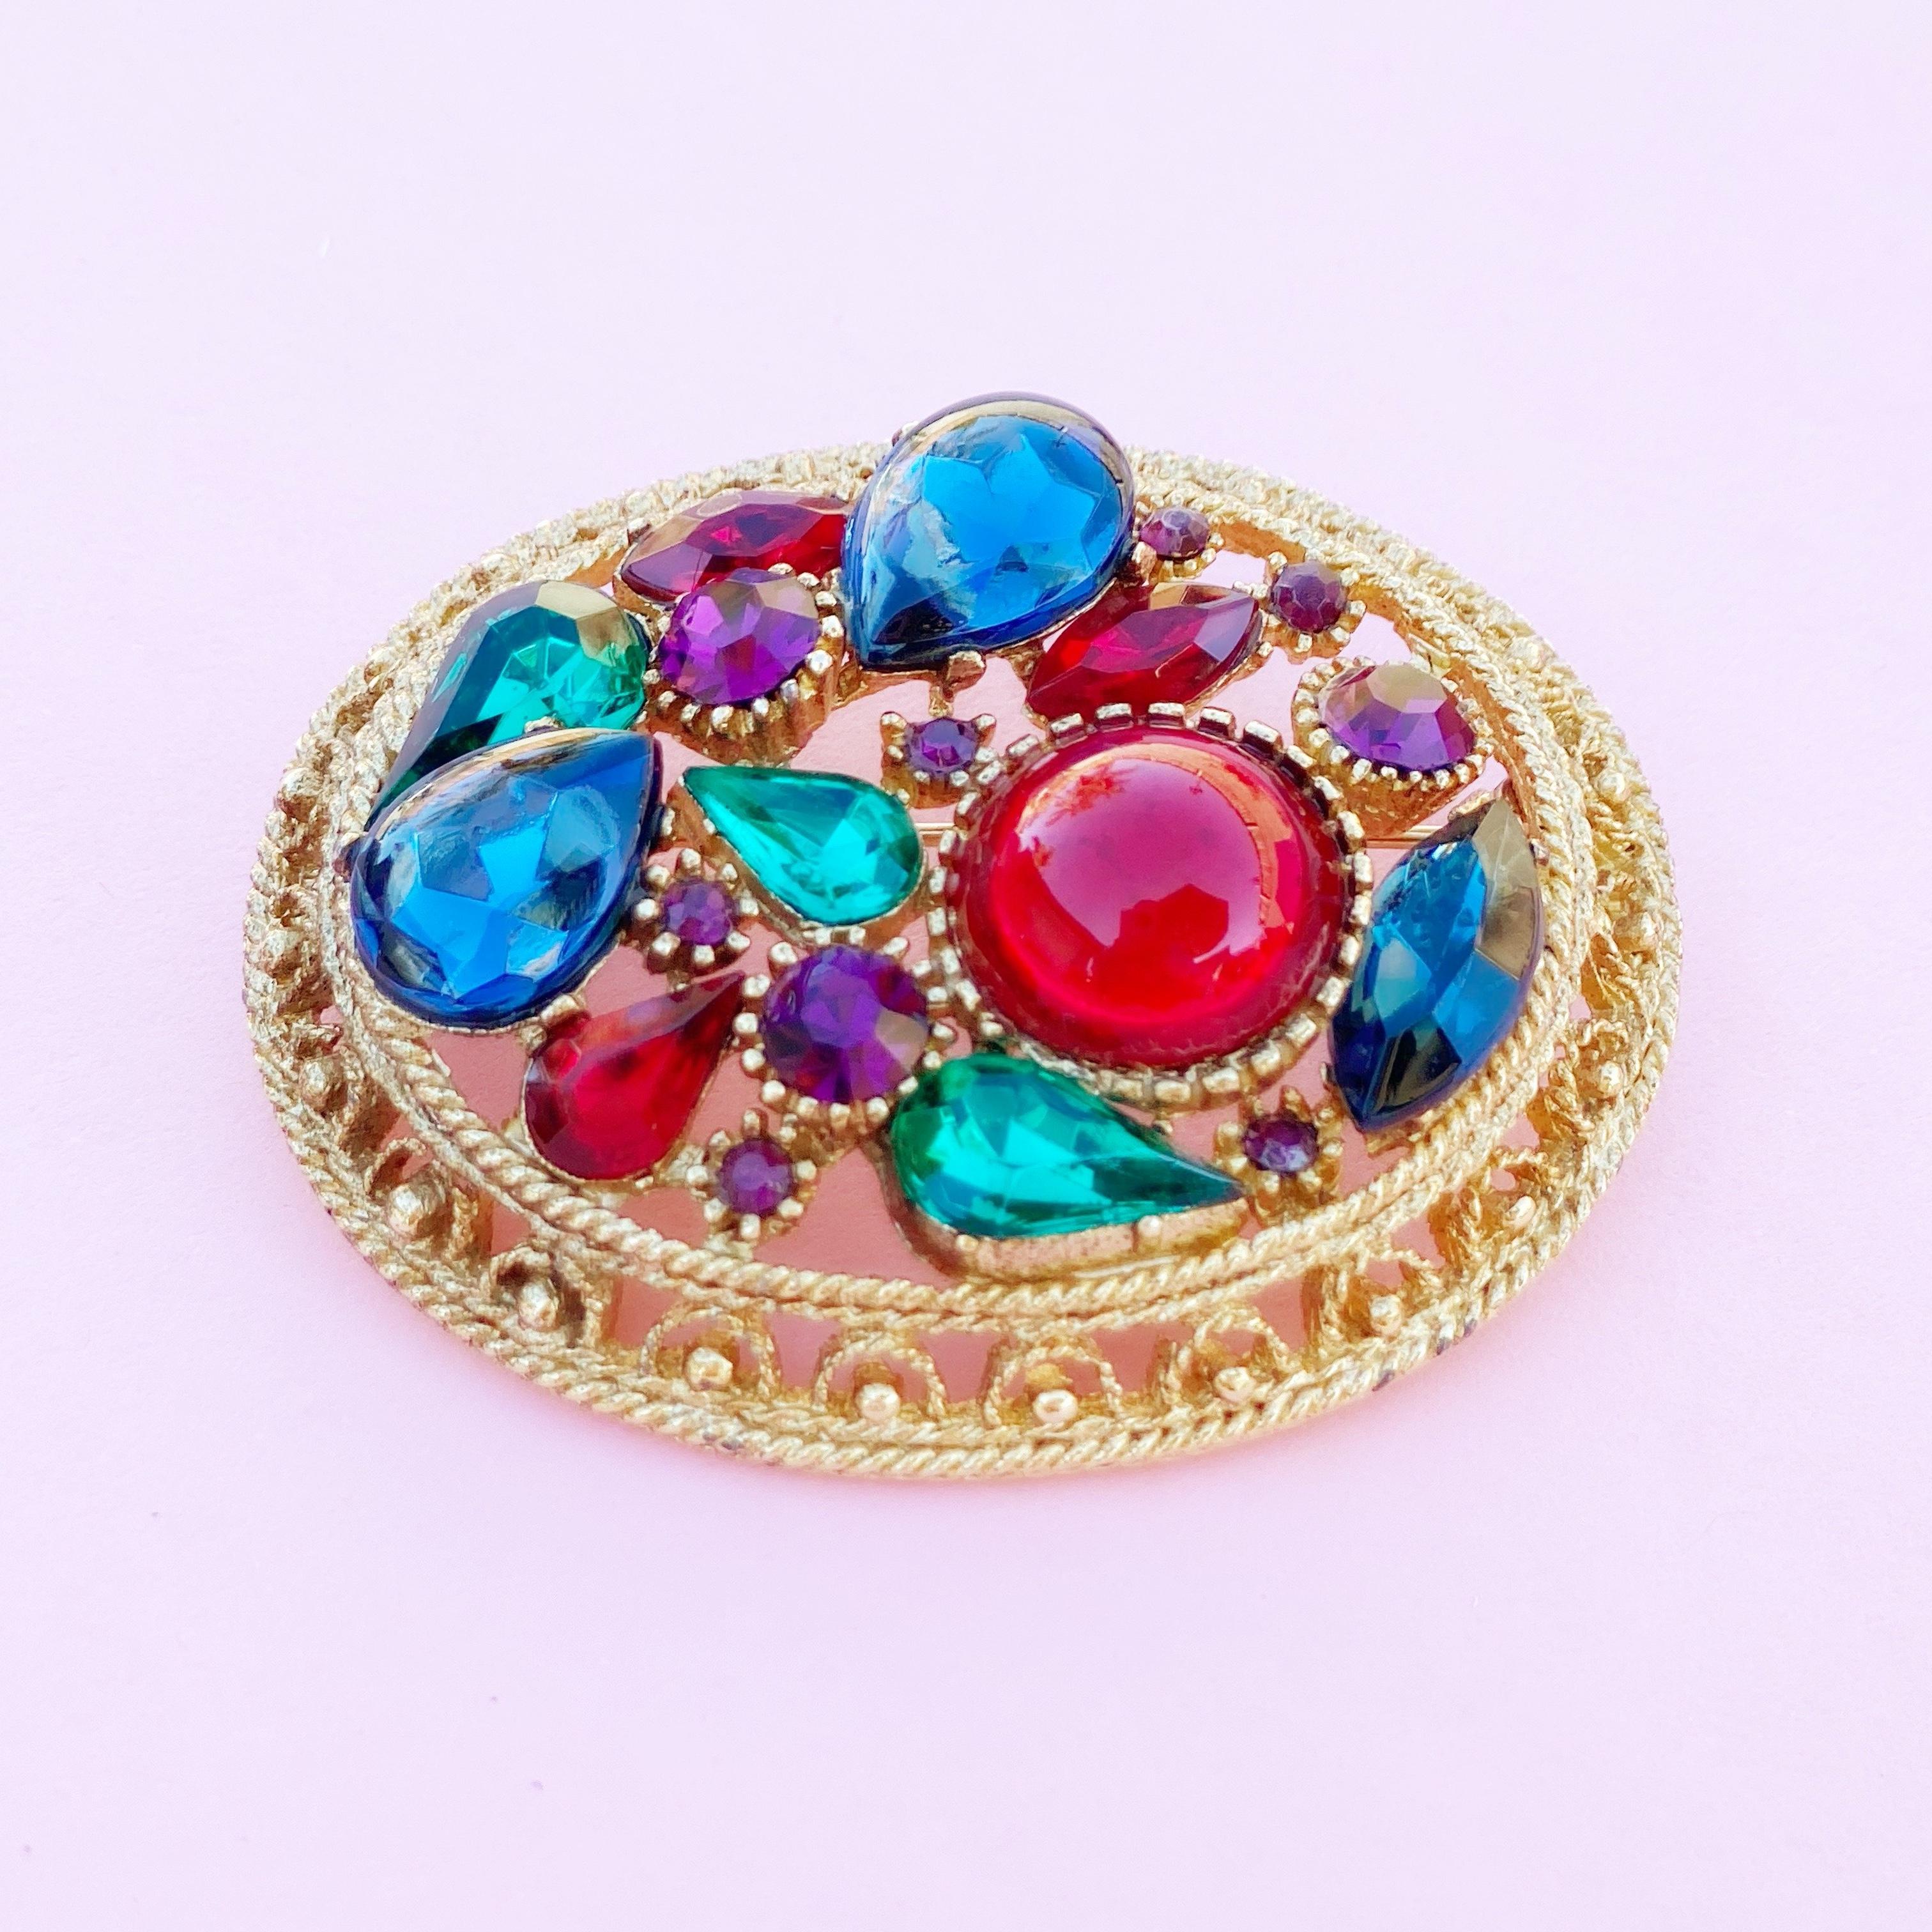 Modern Vintage Oval Mughal Style Cabochon Brooch by Sphinx, 1960s